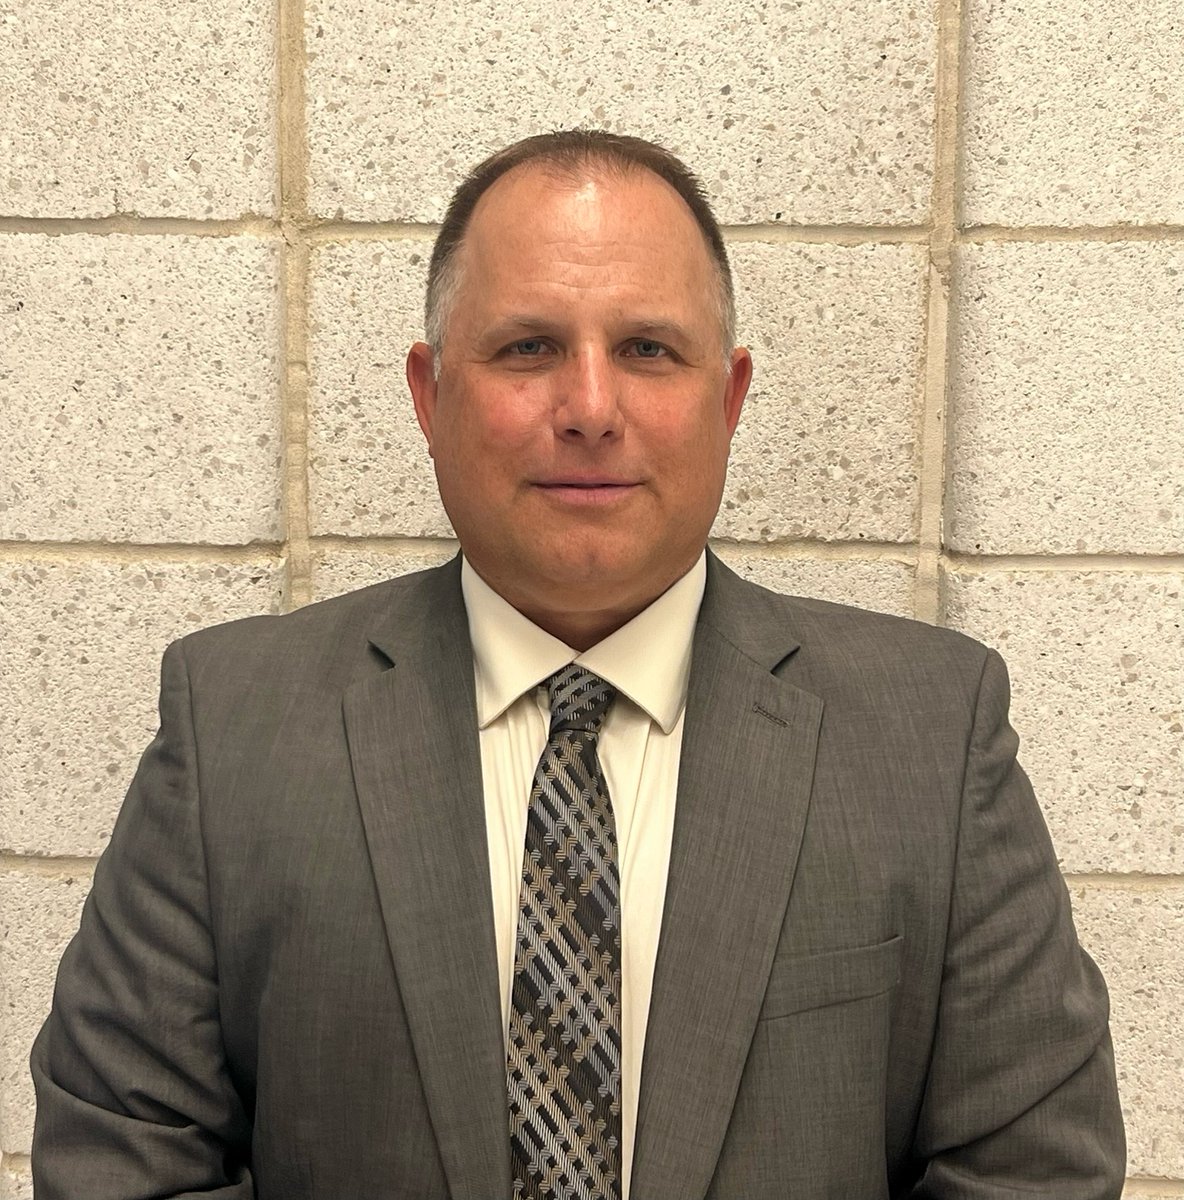 Please welcome Dr. Bill Henderson as #WJHSD's new Assistant Superintendent! Dr. Henderson will officially begin with the district on July 1. Welcome to the WJHSD community! #WErTJ @phmsjaguars Story: community.triblive.com/c/south-hills-…